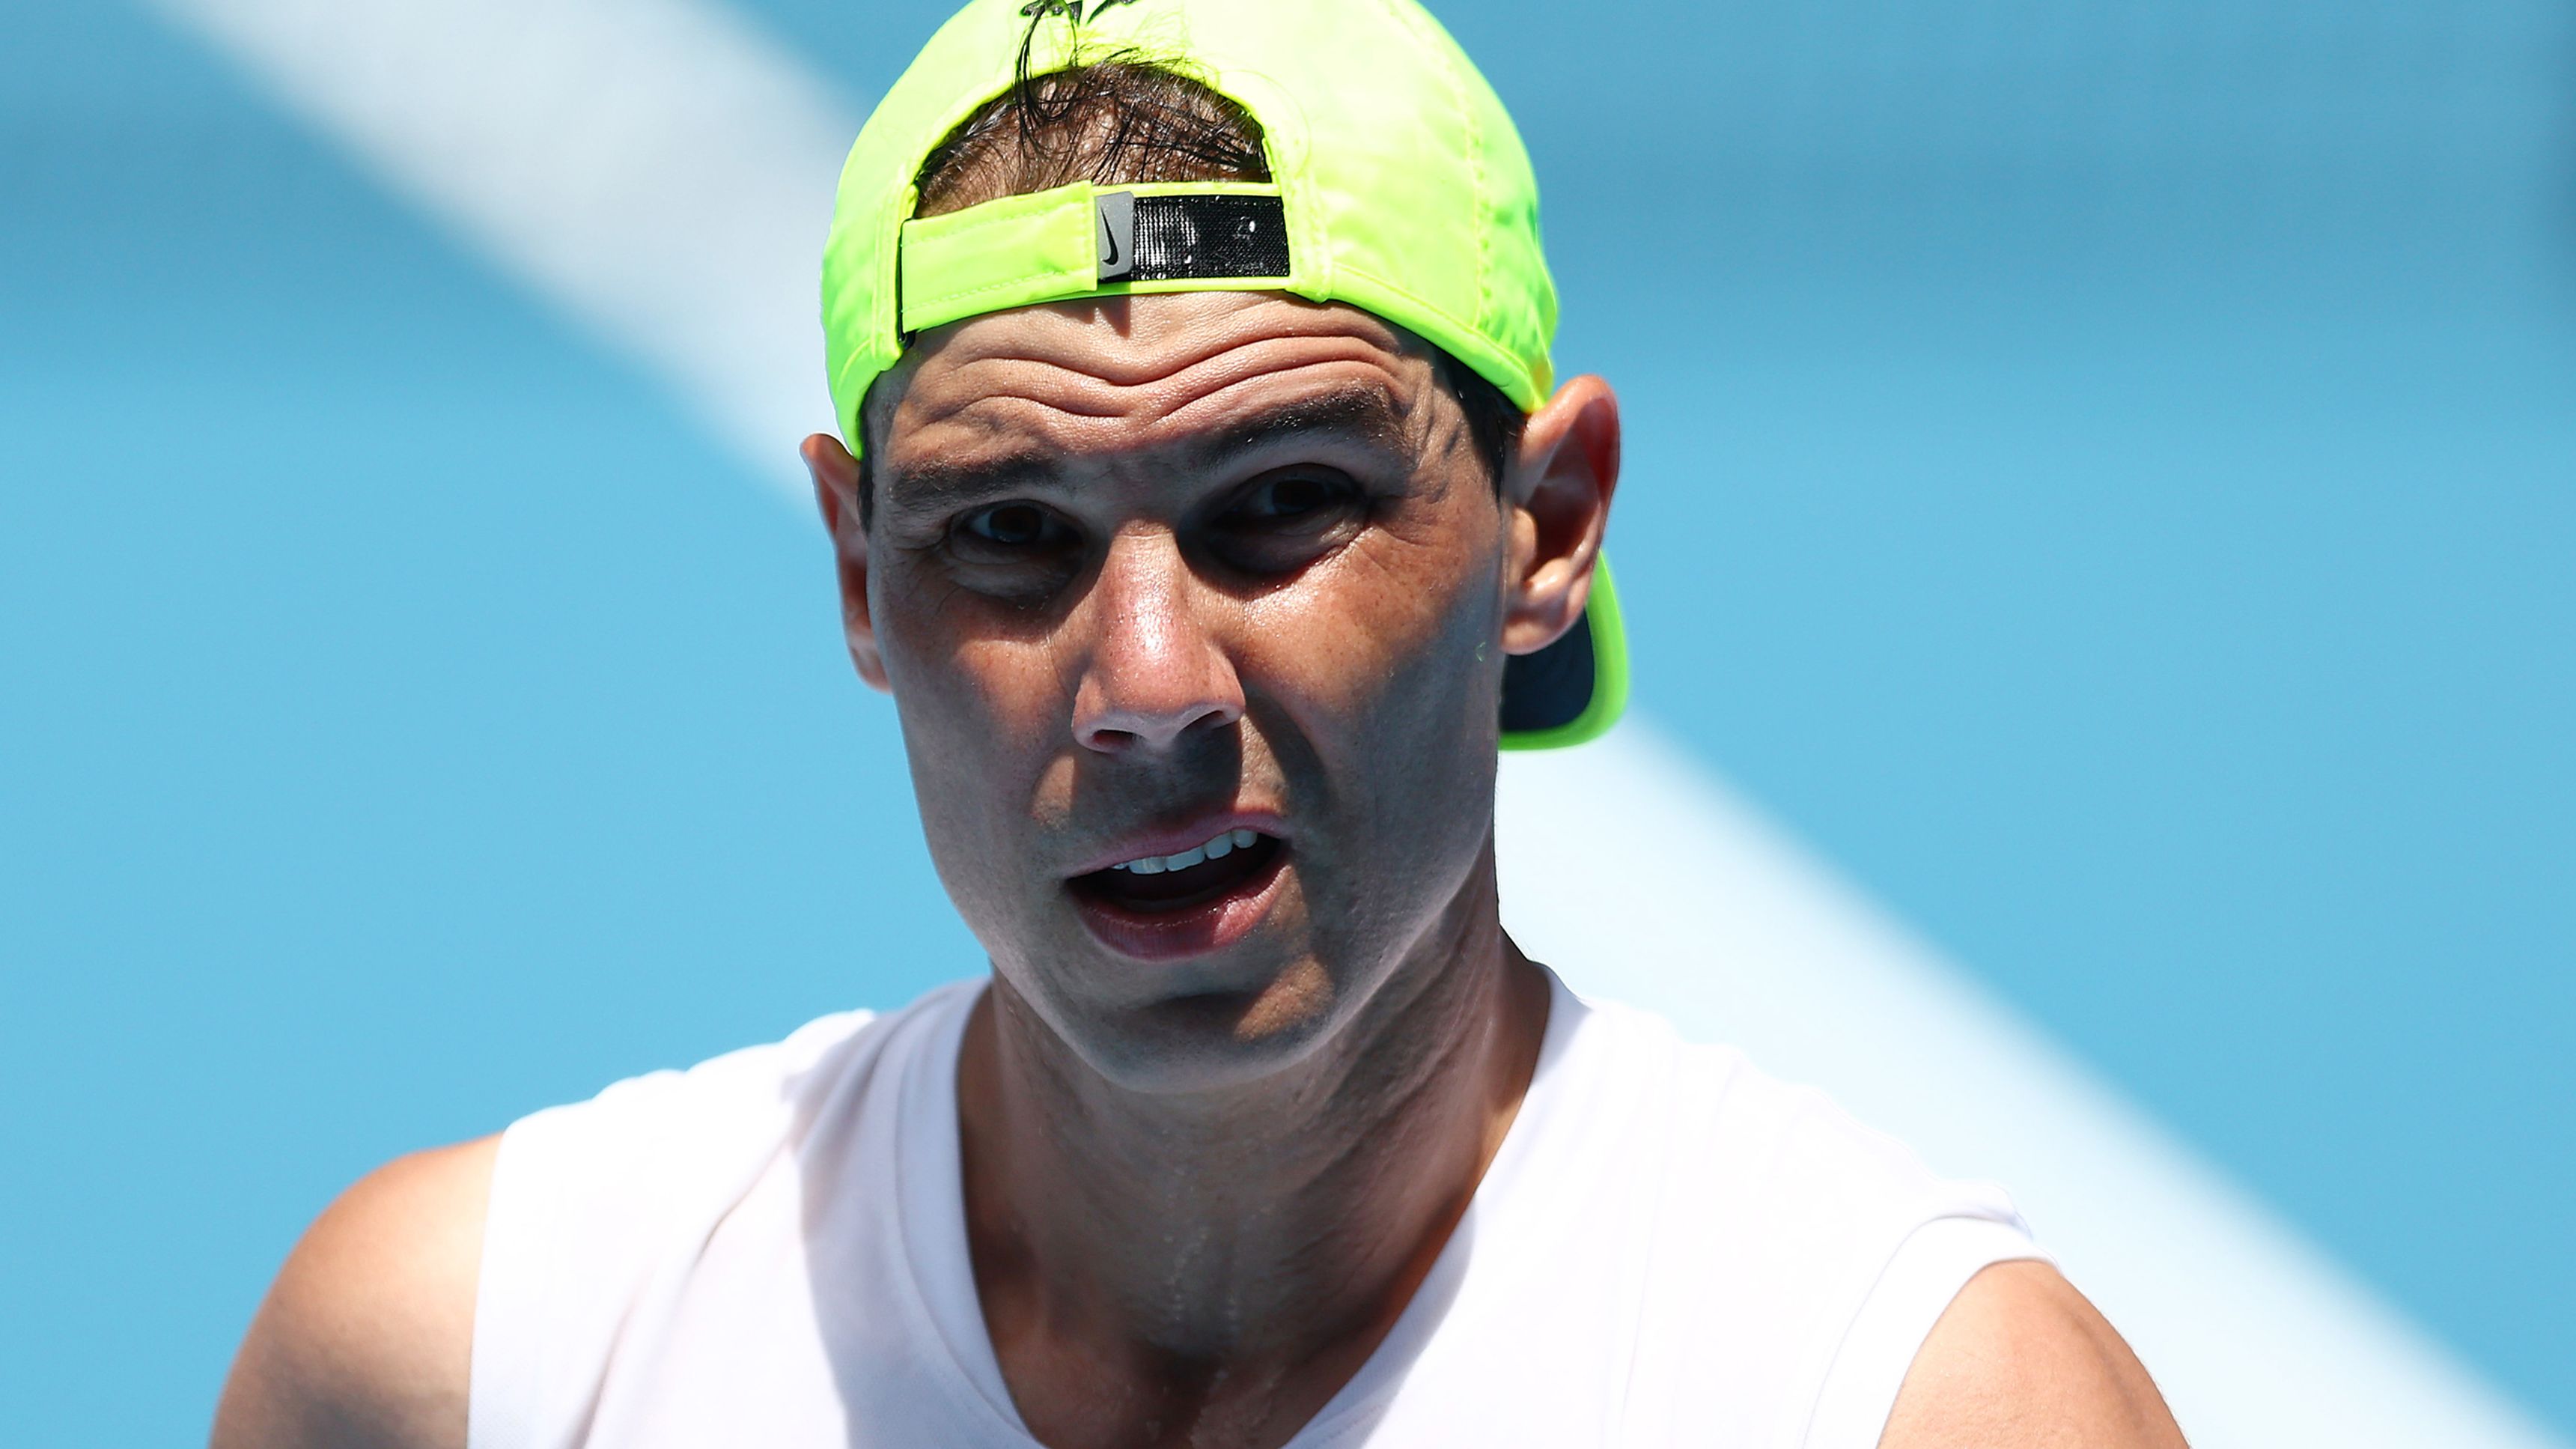 Wally Masur warns Rafael Nadal could face first-round elimination by 'awkward' opponent